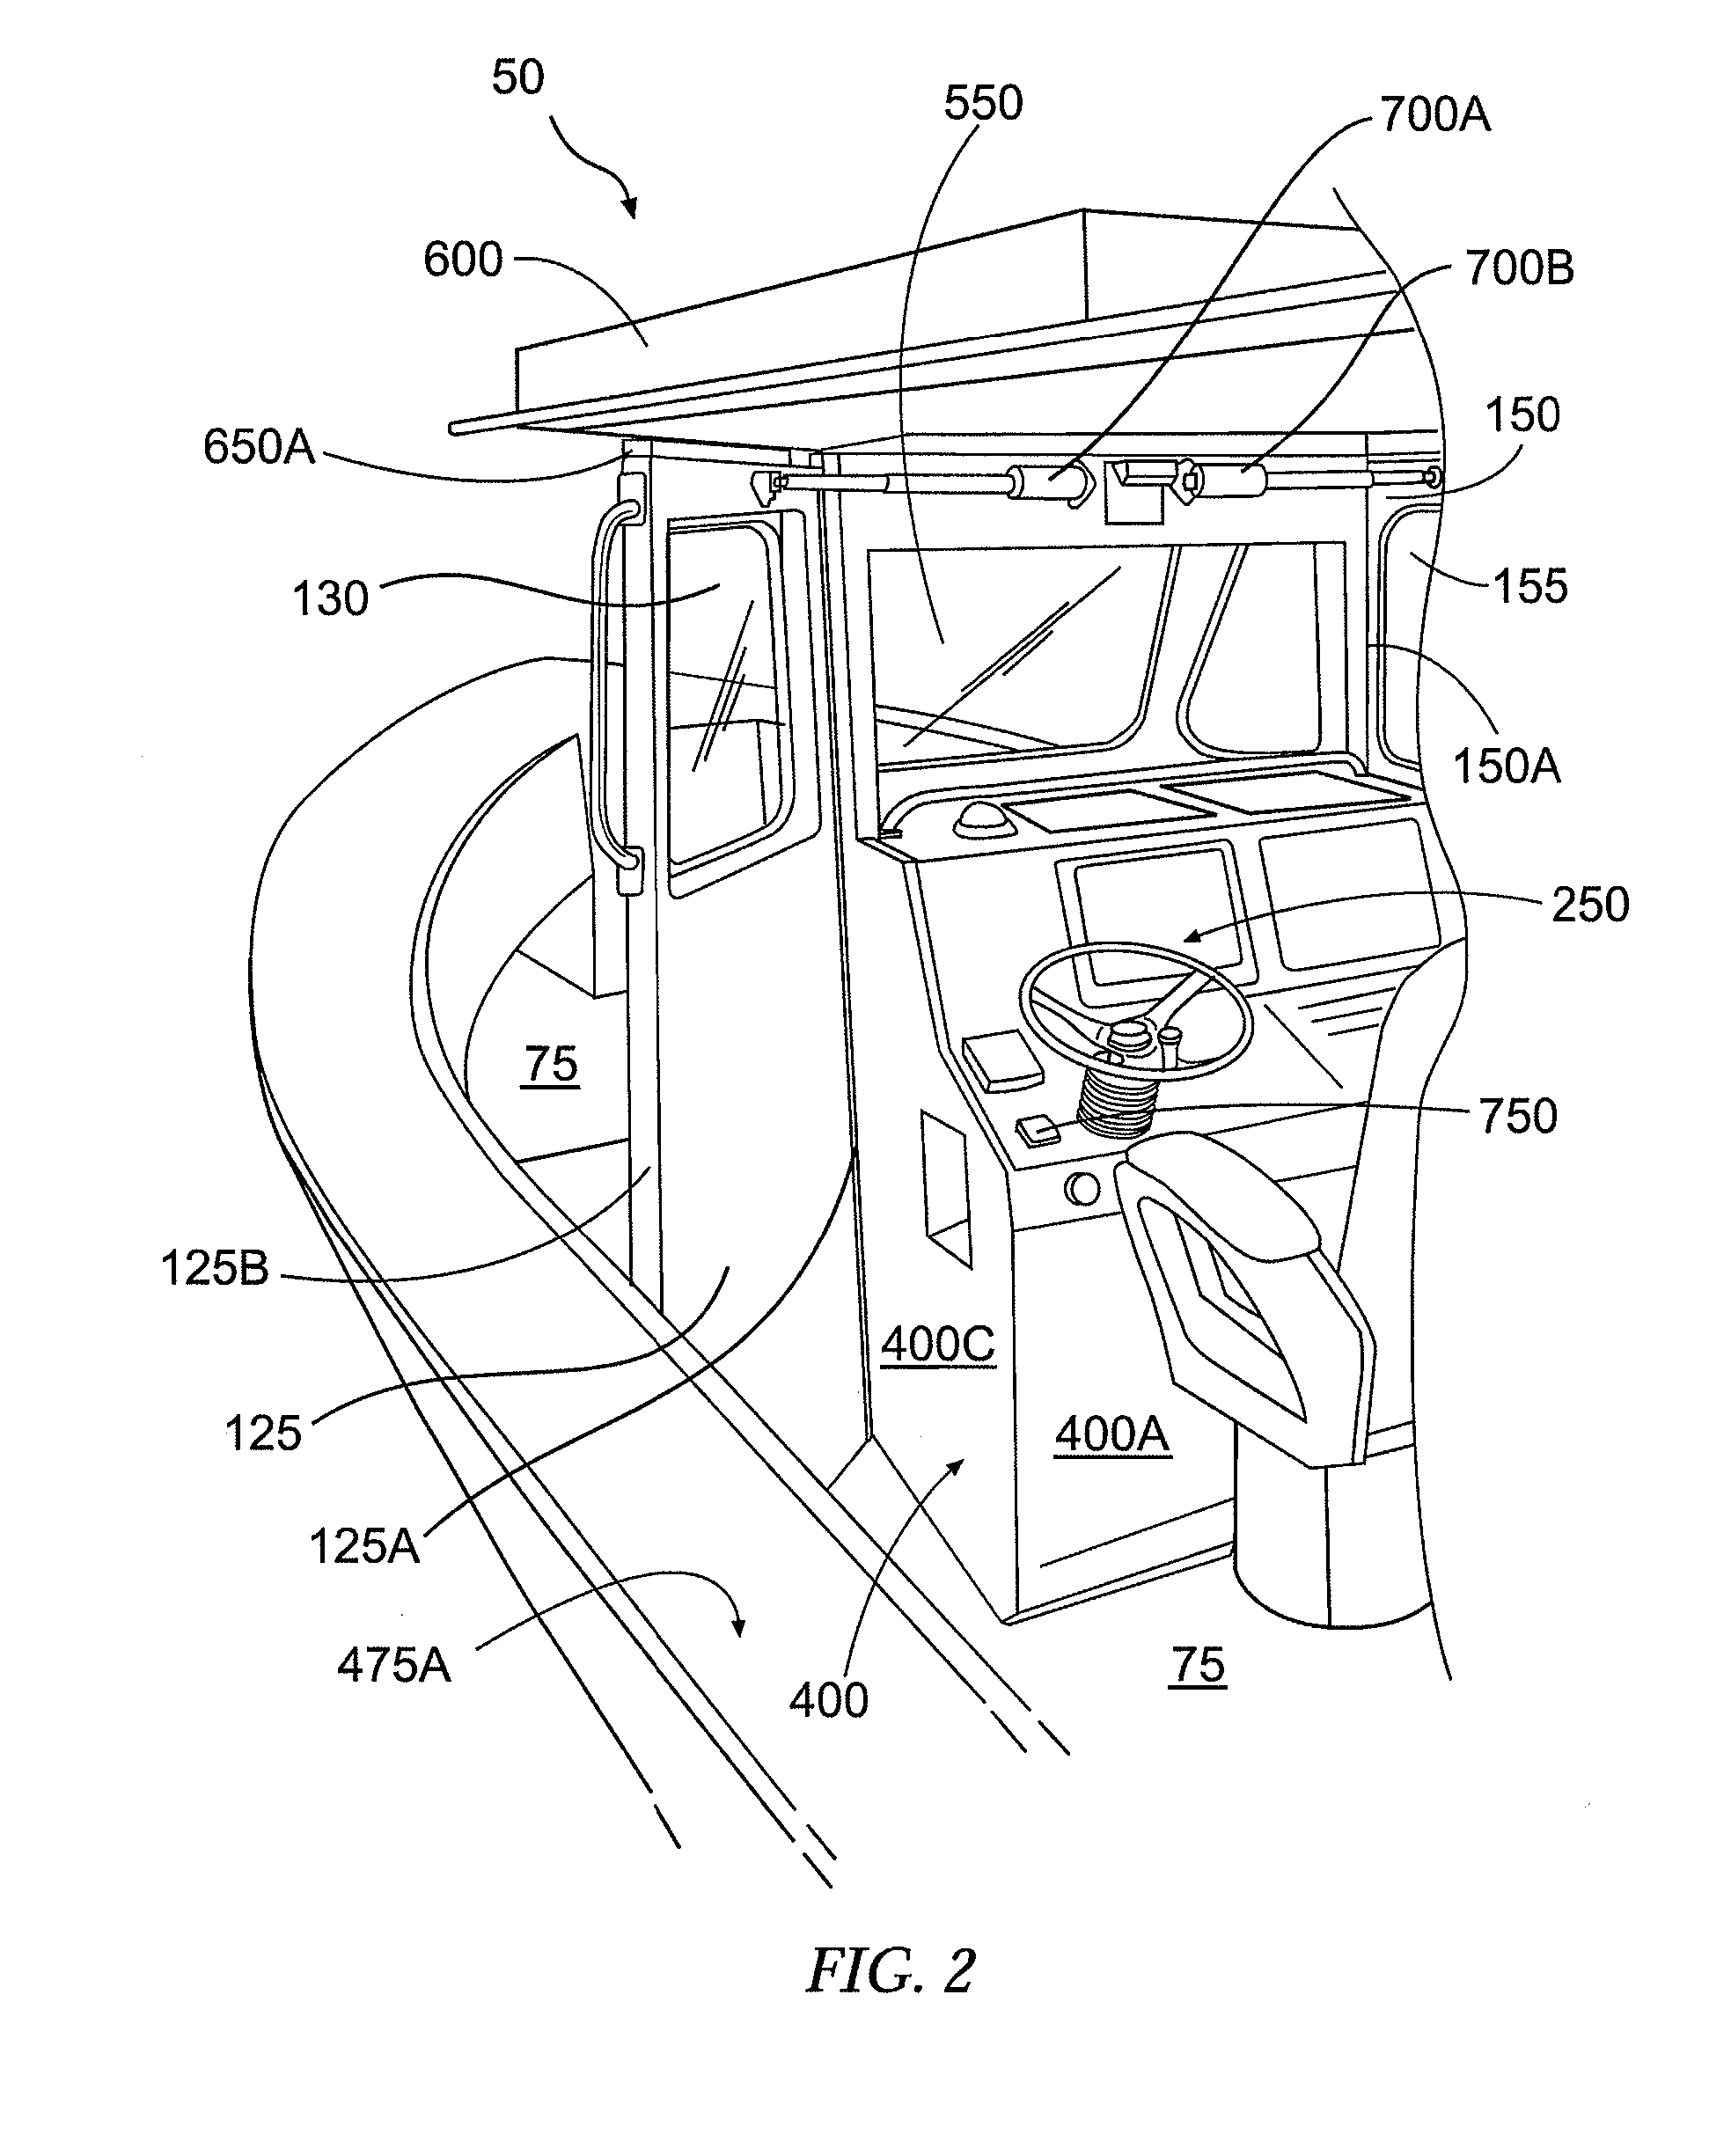 Occupant Protection Apparatus For A Center Console Vessel